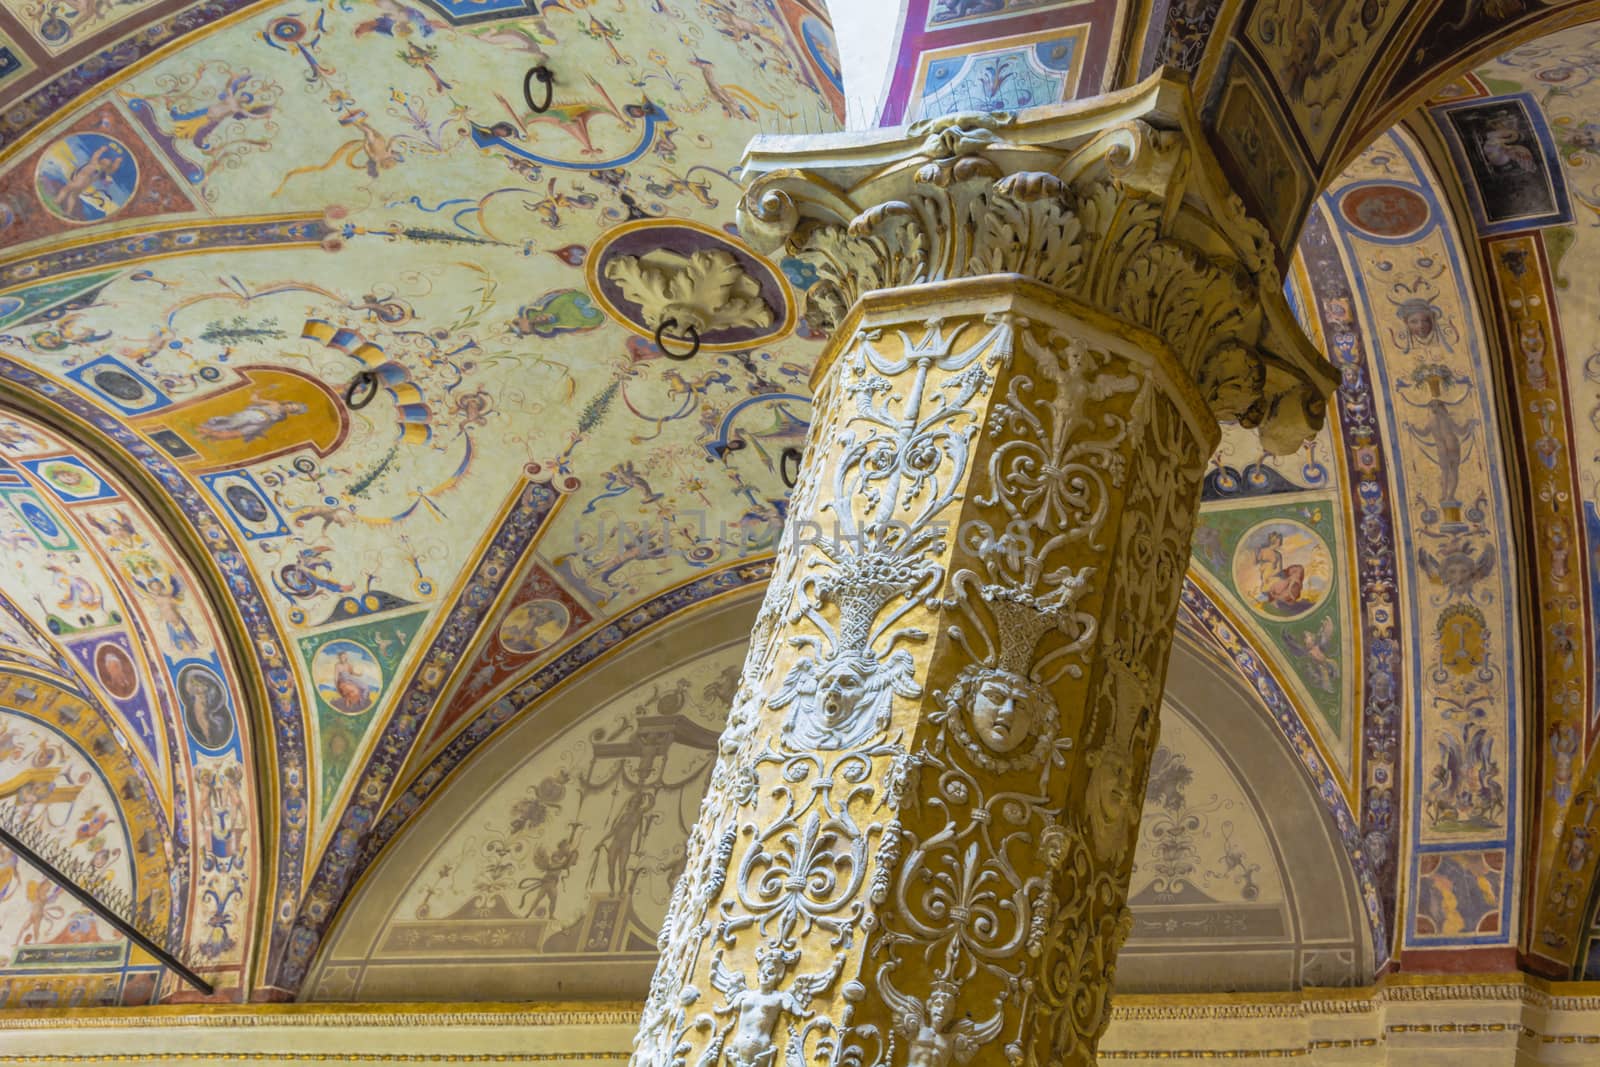 Detail of a decorated column and ceiling in the Palazzo della Signoria first Courtyard